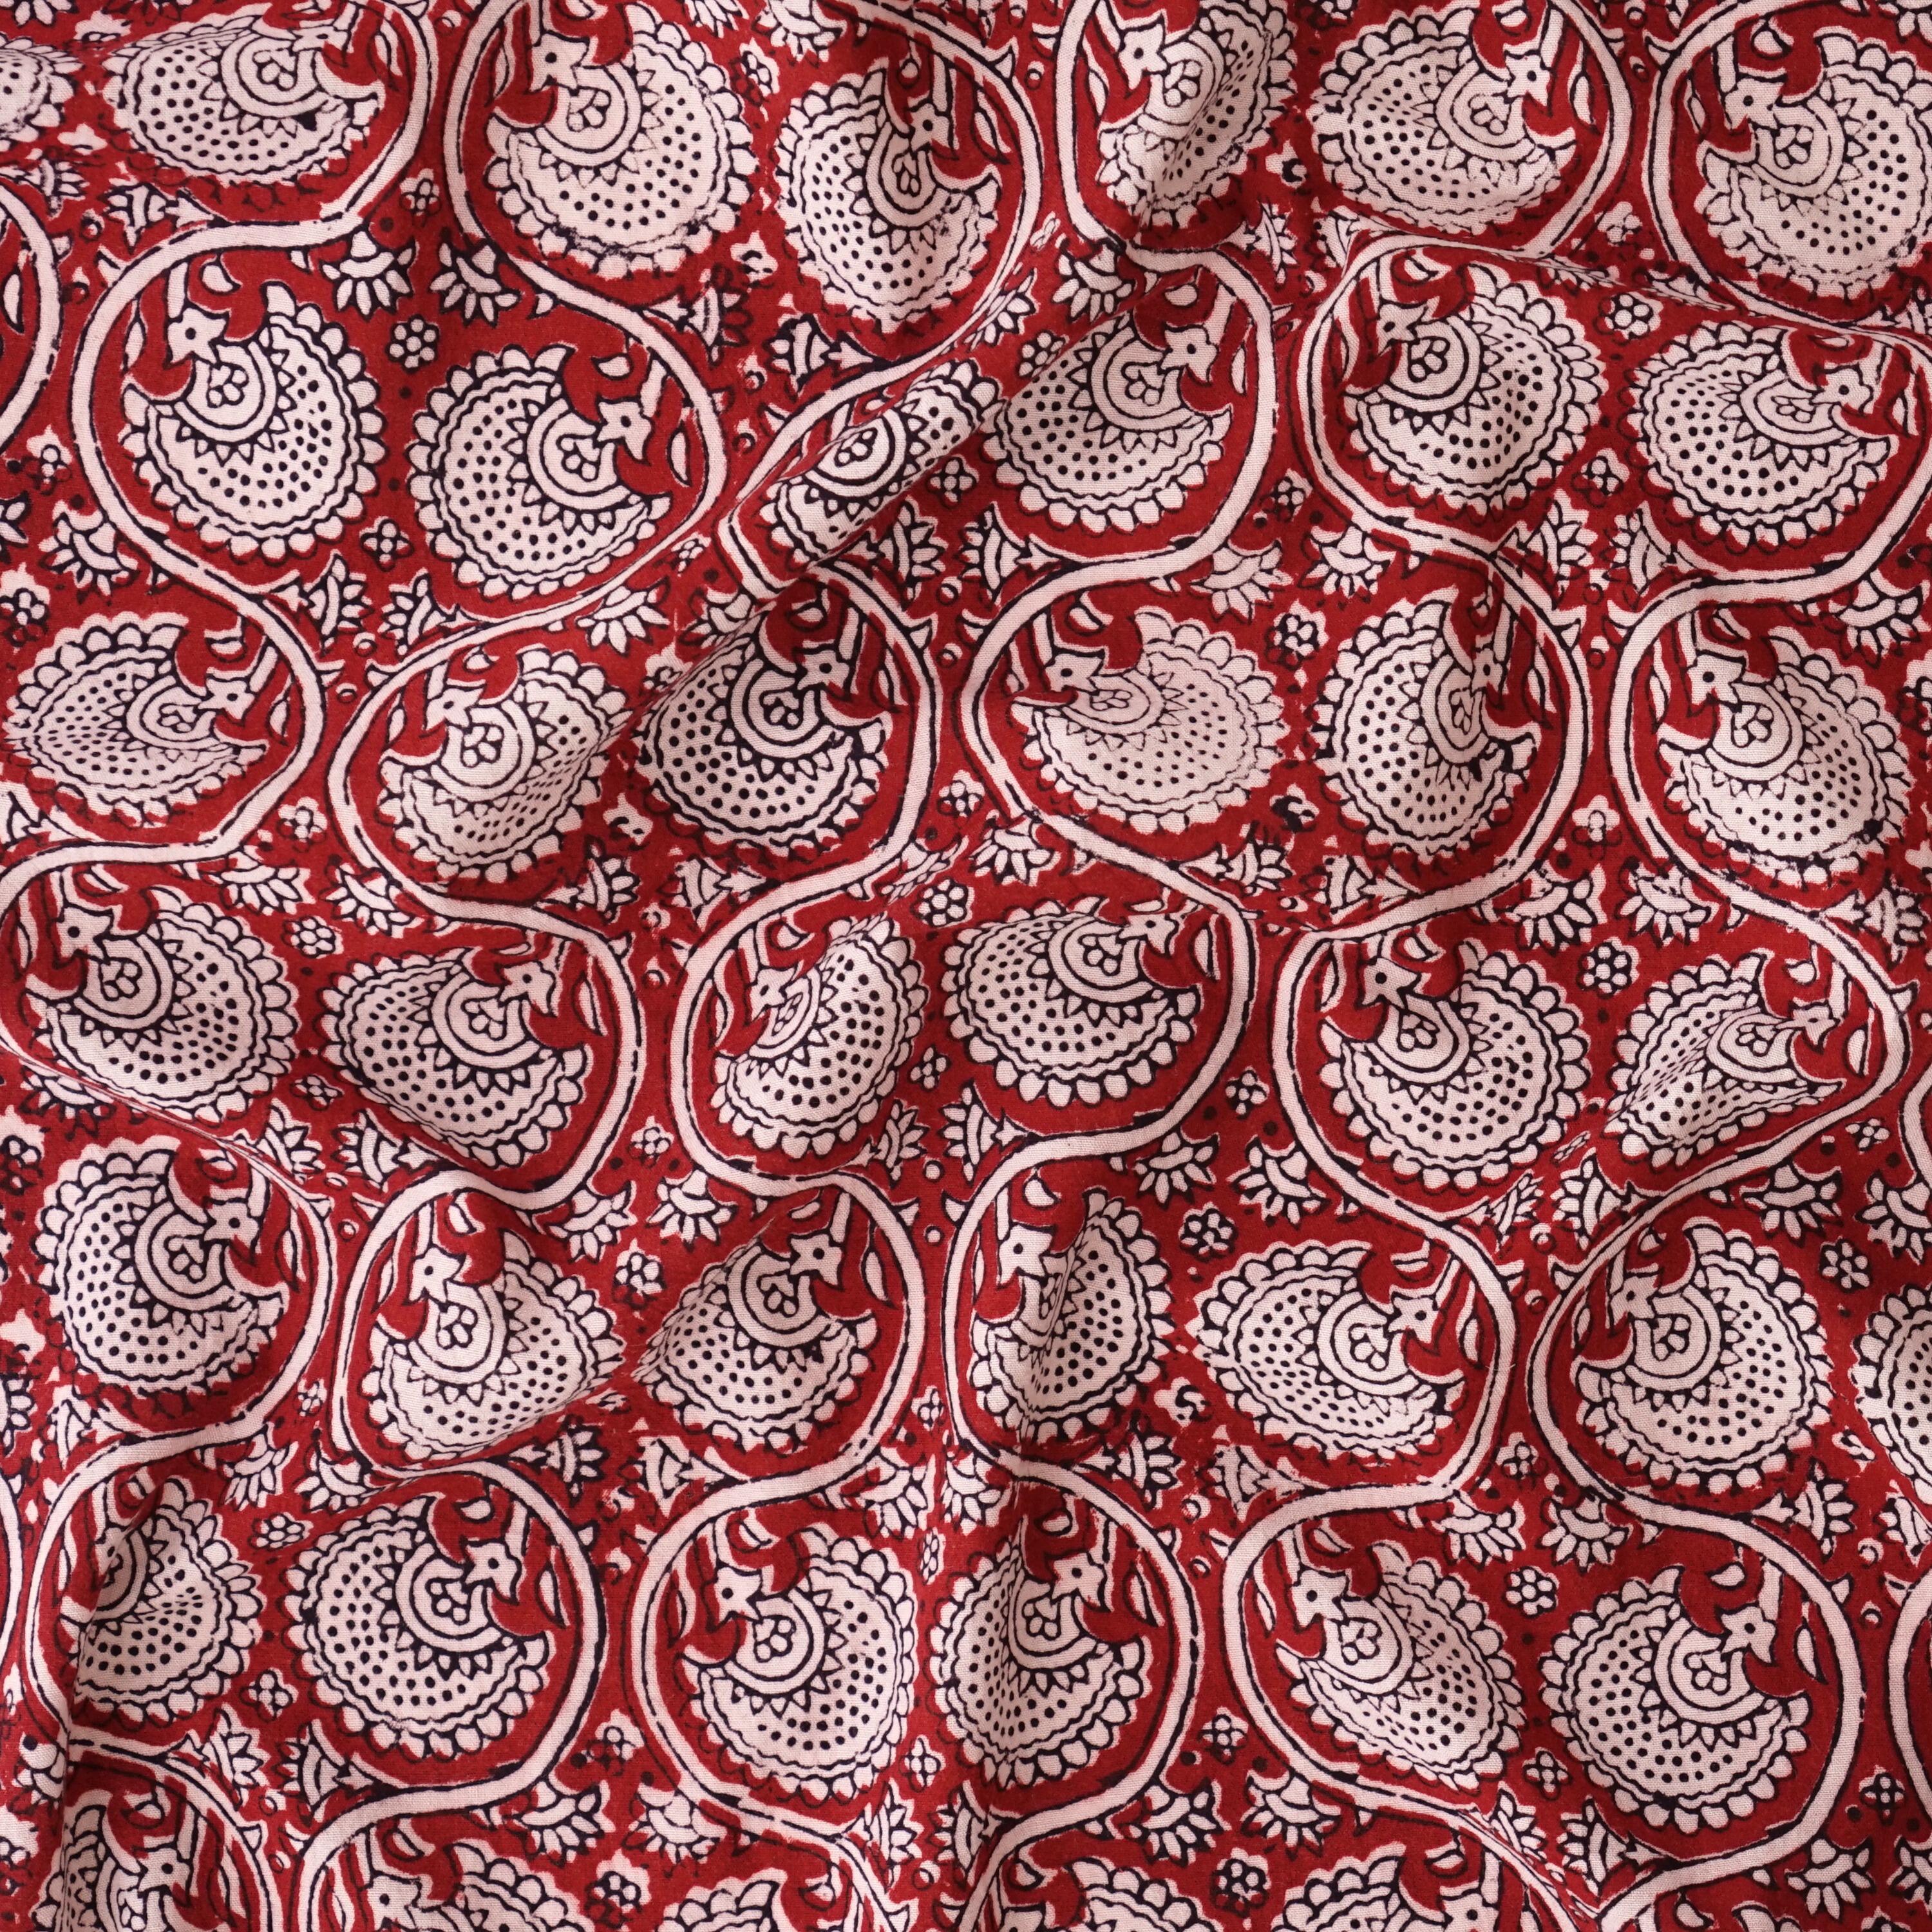 100% Block-Printed Cotton Fabric From India - Idle Moments Design - Iron Rust Black & Alizarin Red Dyes - Contrast